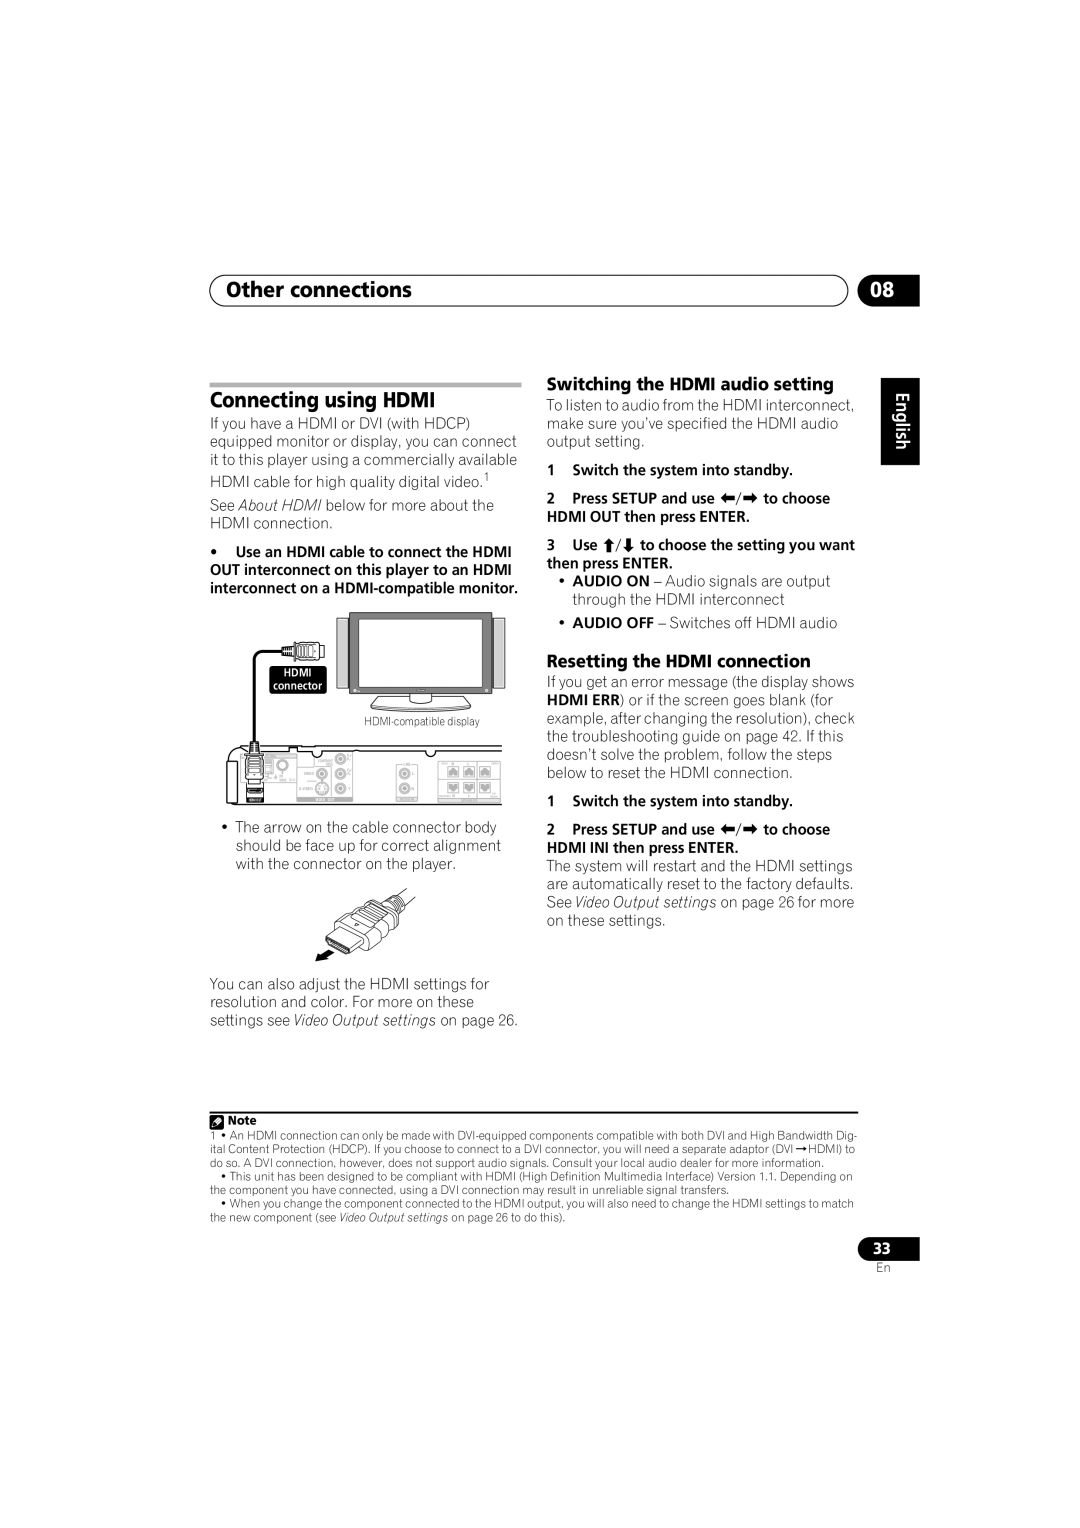 Pioneer HTZ-360DV manual Other connections, Connecting using HDMI, Switching the HDMI audio setting 